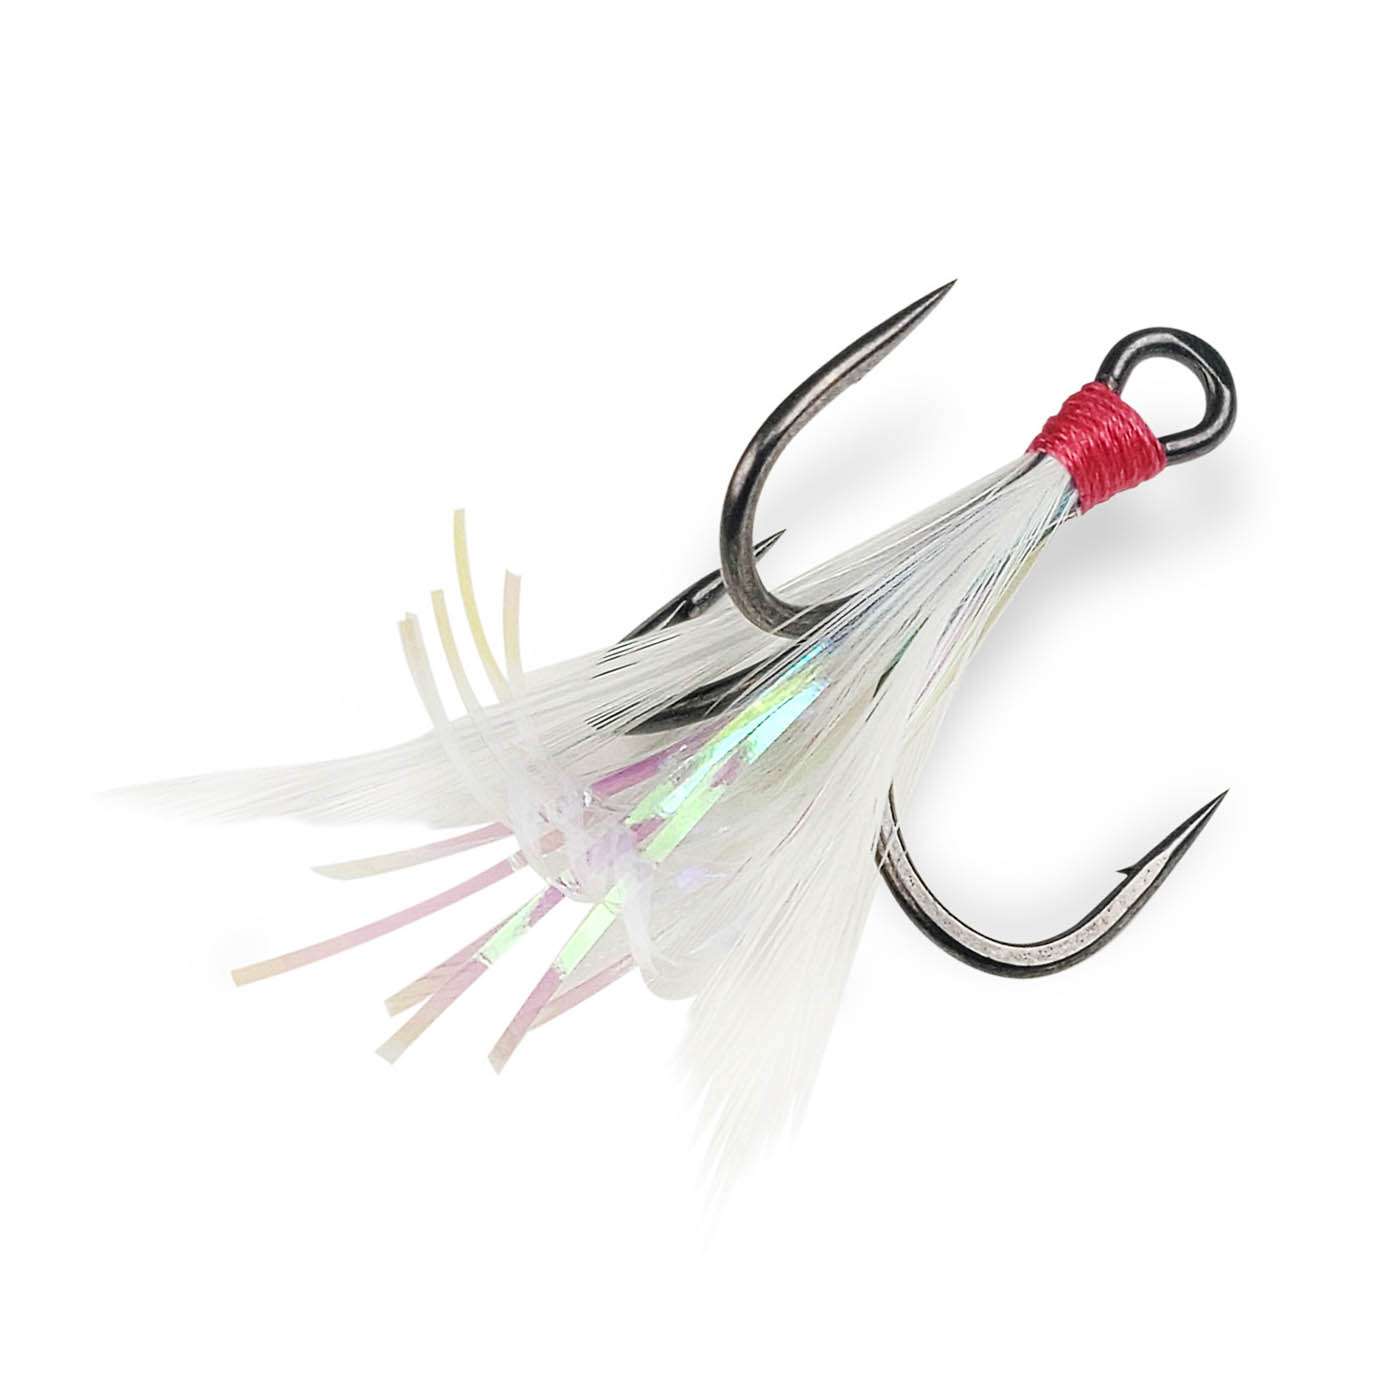 <p><strong>Gamakatsu G-Finesse Feathered Treble MH</strong></p><p>Based largely on the input of Aaron Martens, the G-Finesse feathered trebles feature either white or chartreuse premium feathers and complementary tinsel, hand selected by Martens to tempt even the most finicky fish. The G-Finesse feathered trebles feature TGW (Tournament-Grade Wire) construction, which is thinner, stronger and sharper than the standard wire. That means anglers will use fewer of them while ensuring better hook up percentages. To complete the job, they come with a Nano-Coat finish that makes penetration even easier. $10.70 - $12.02. <a href=